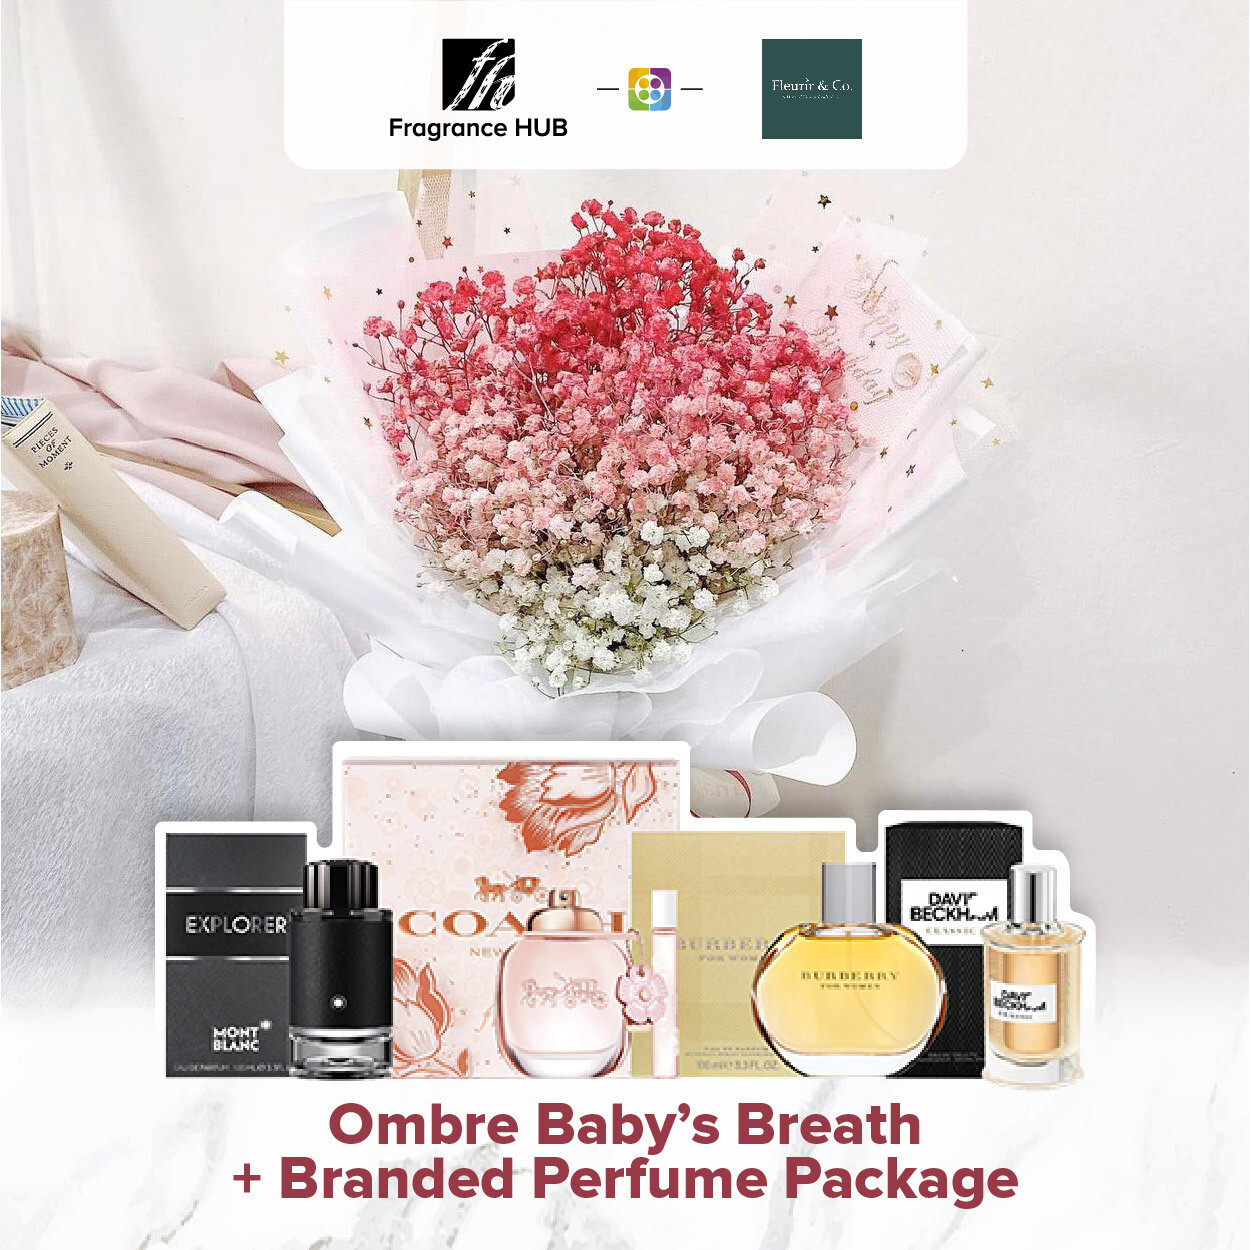 Ombré Baby’s Breath + Fragrance Hub Branded Perfume (By: Fleurir & Co from Kuching)